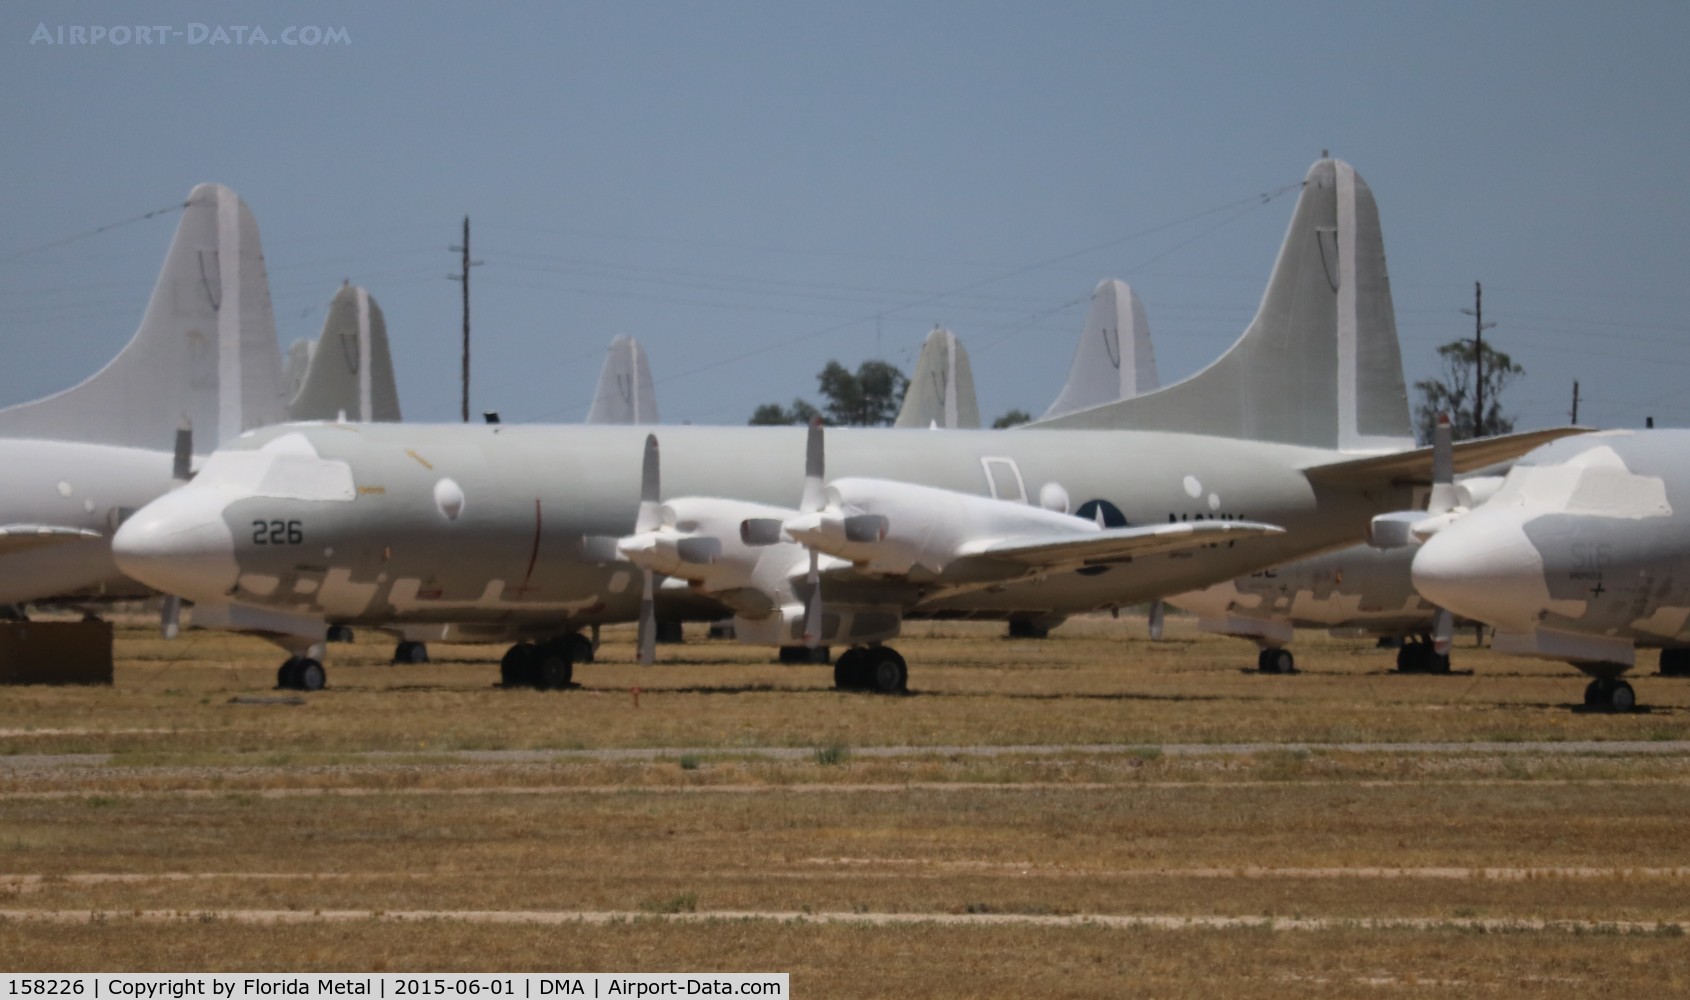 158226, Lockheed P-3C Orion C/N 285A-5571, P-3C Orion